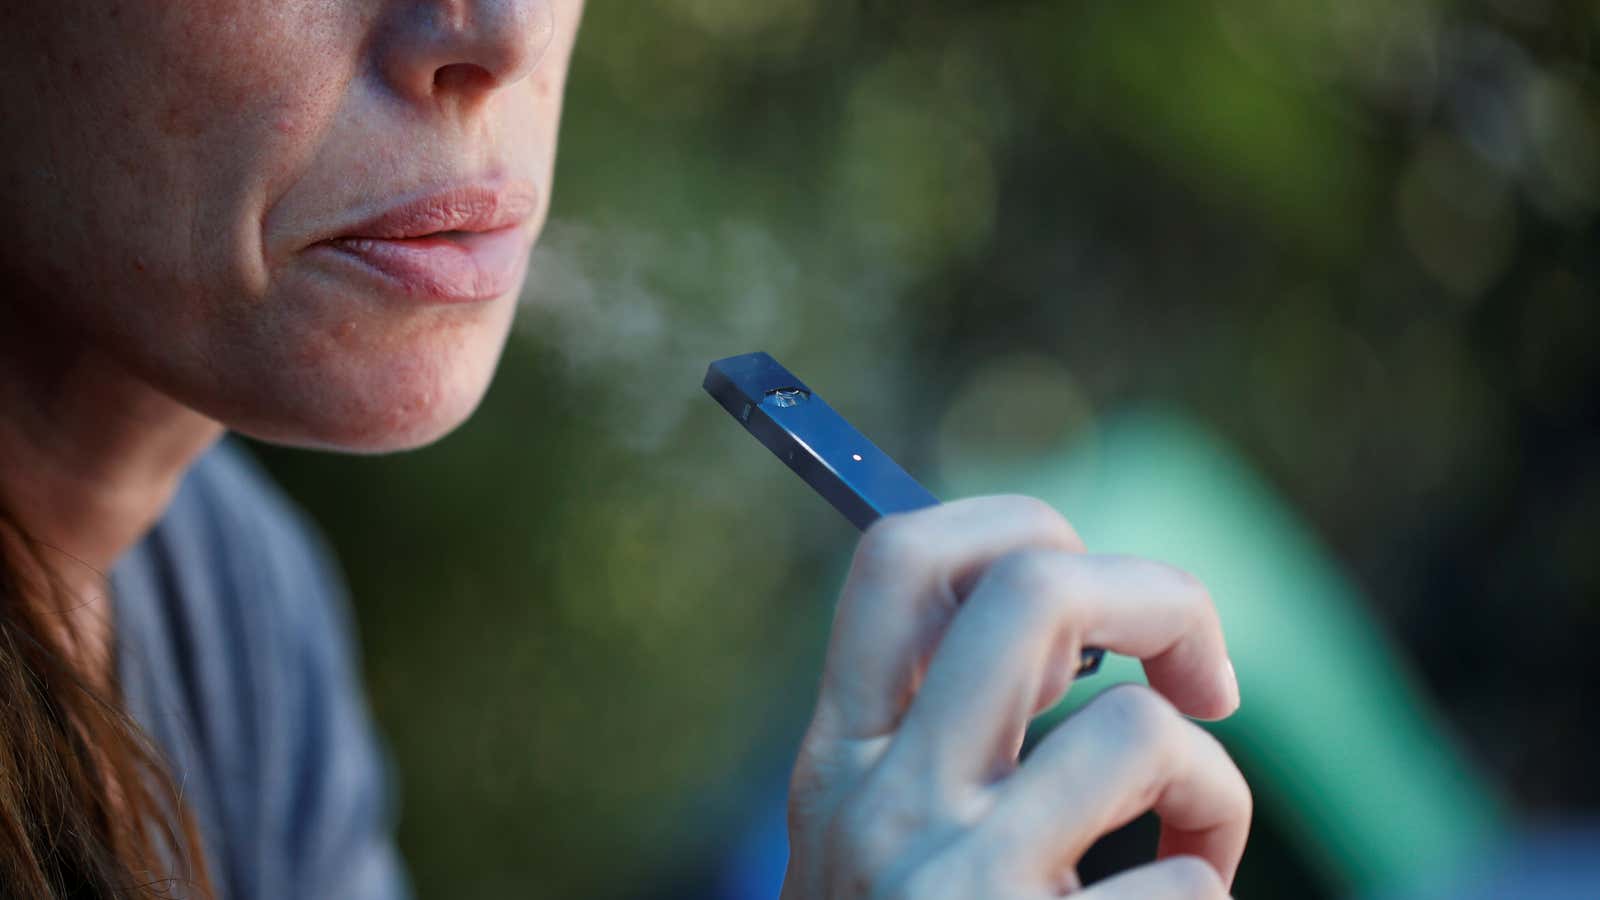 A woman smokes a Juul e-cigarette in this posed picture.